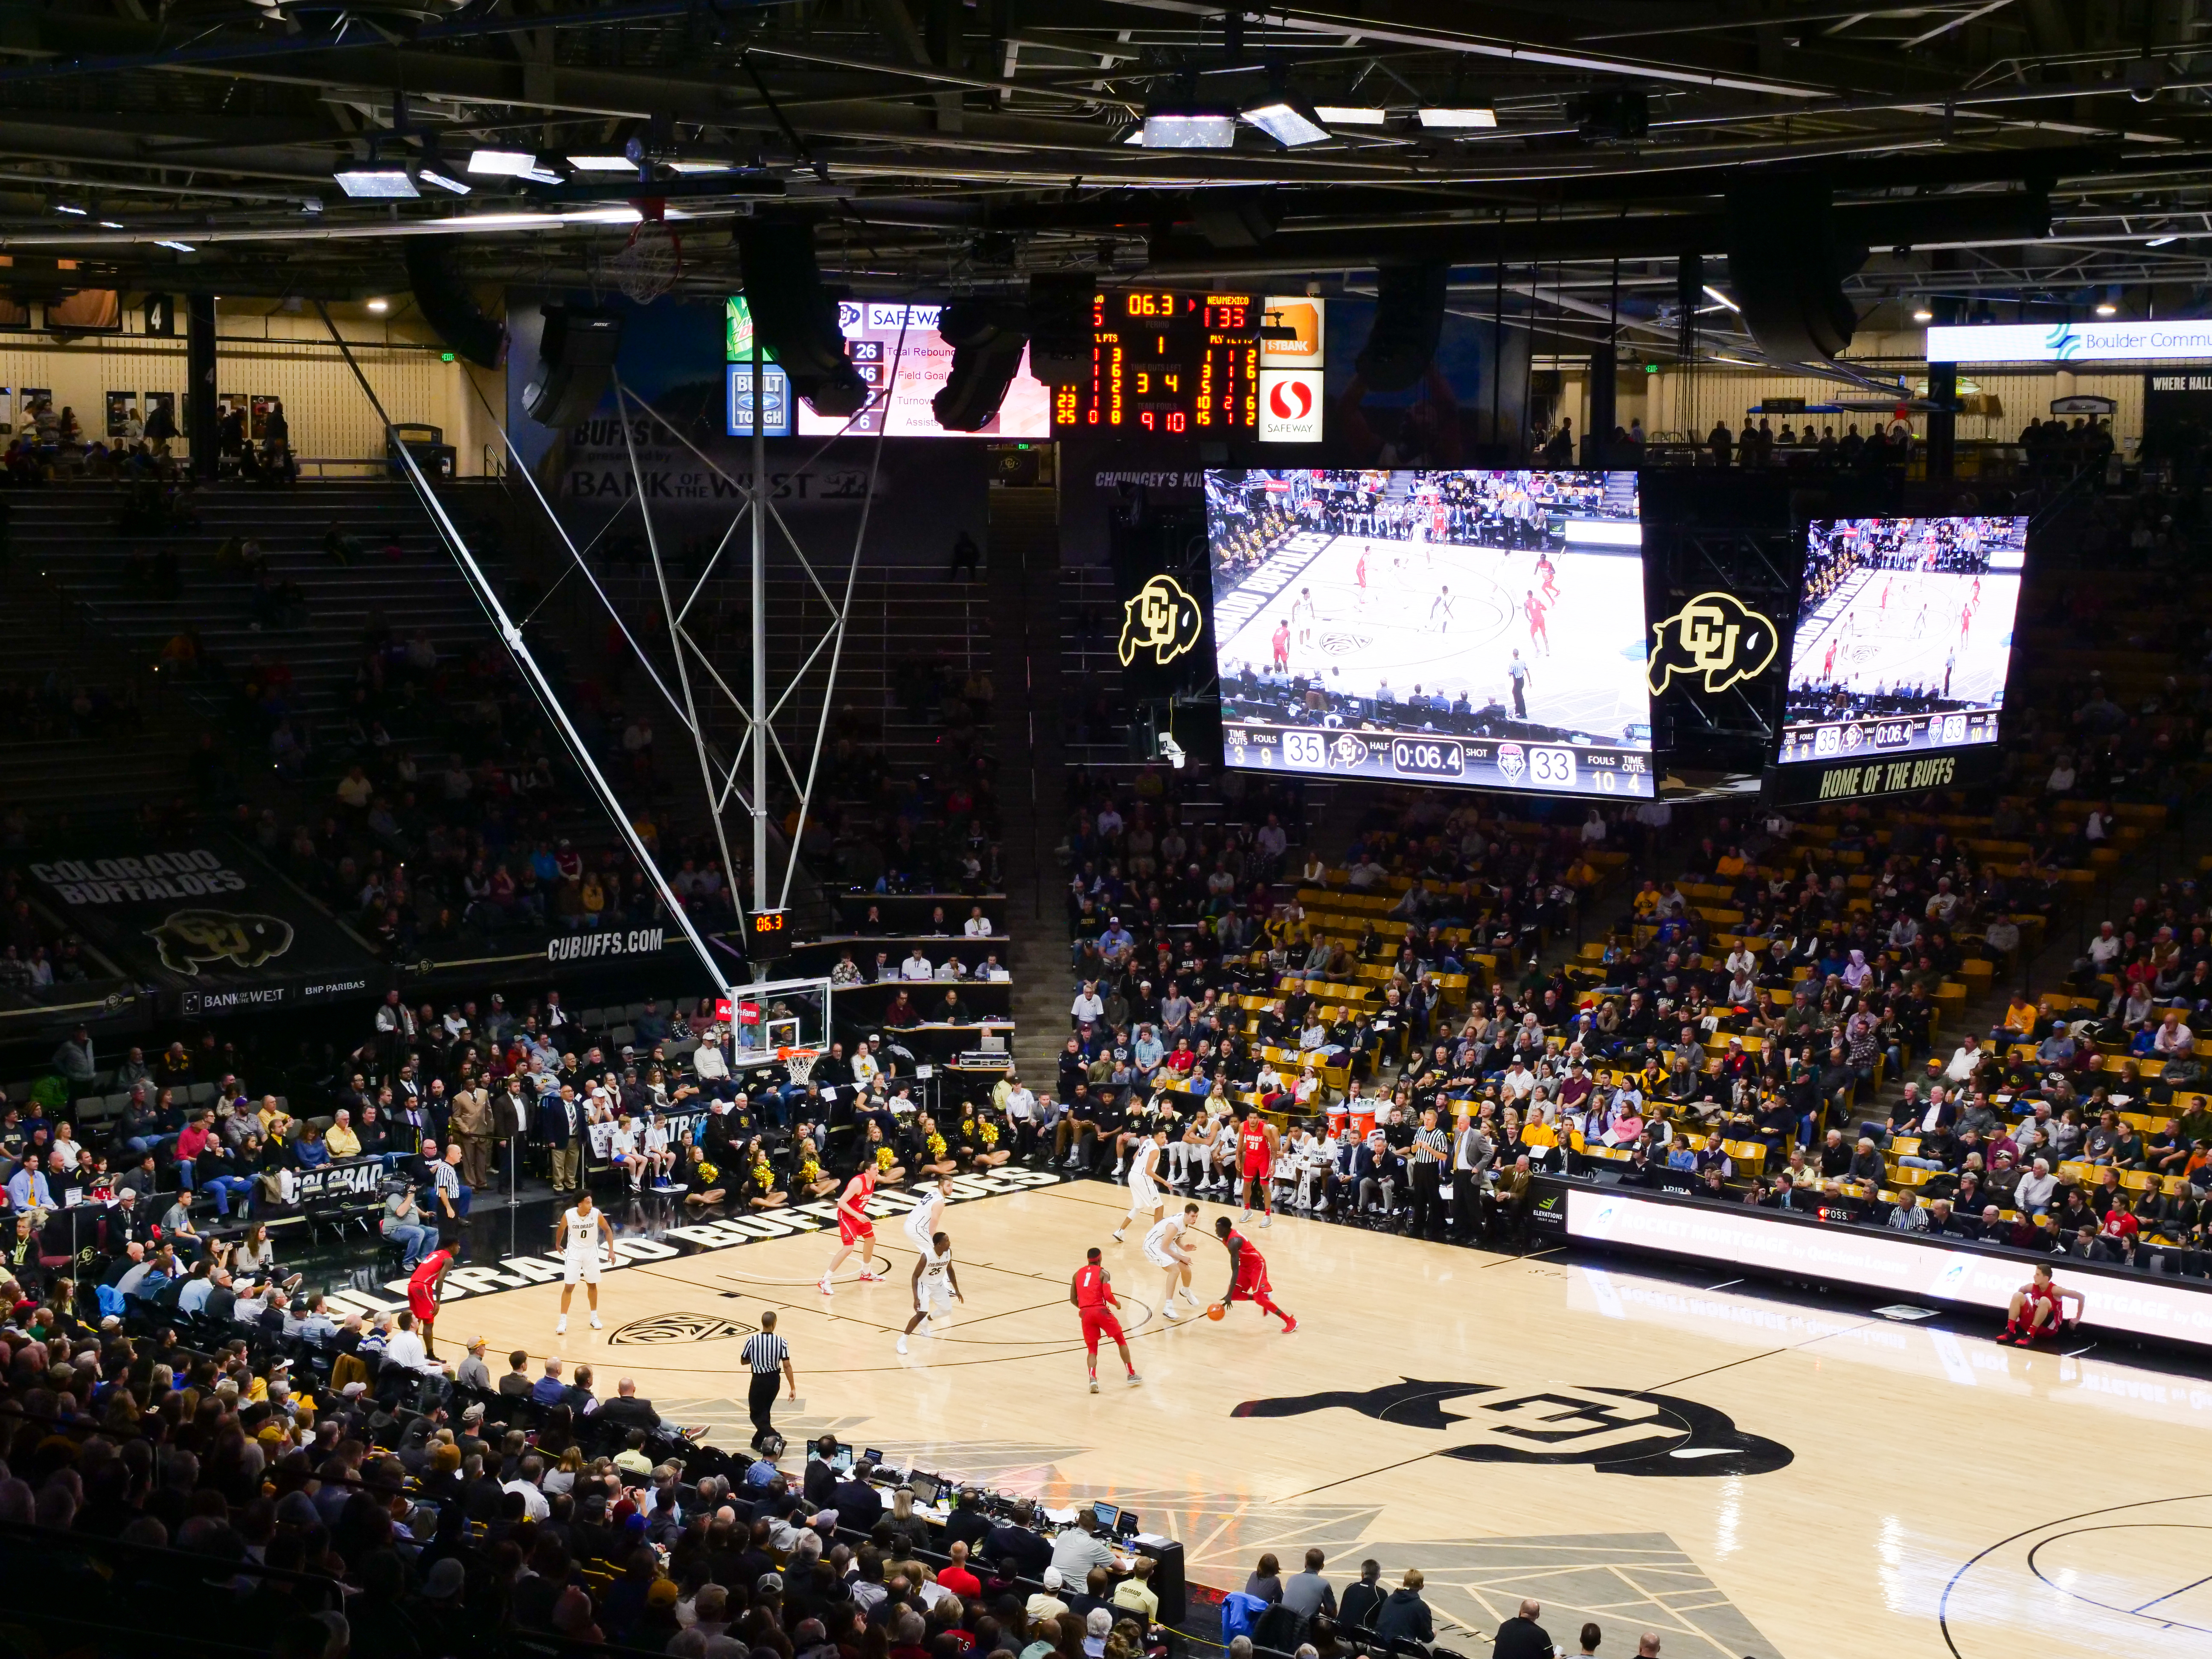 CU men's basketball game at the CU Events Center